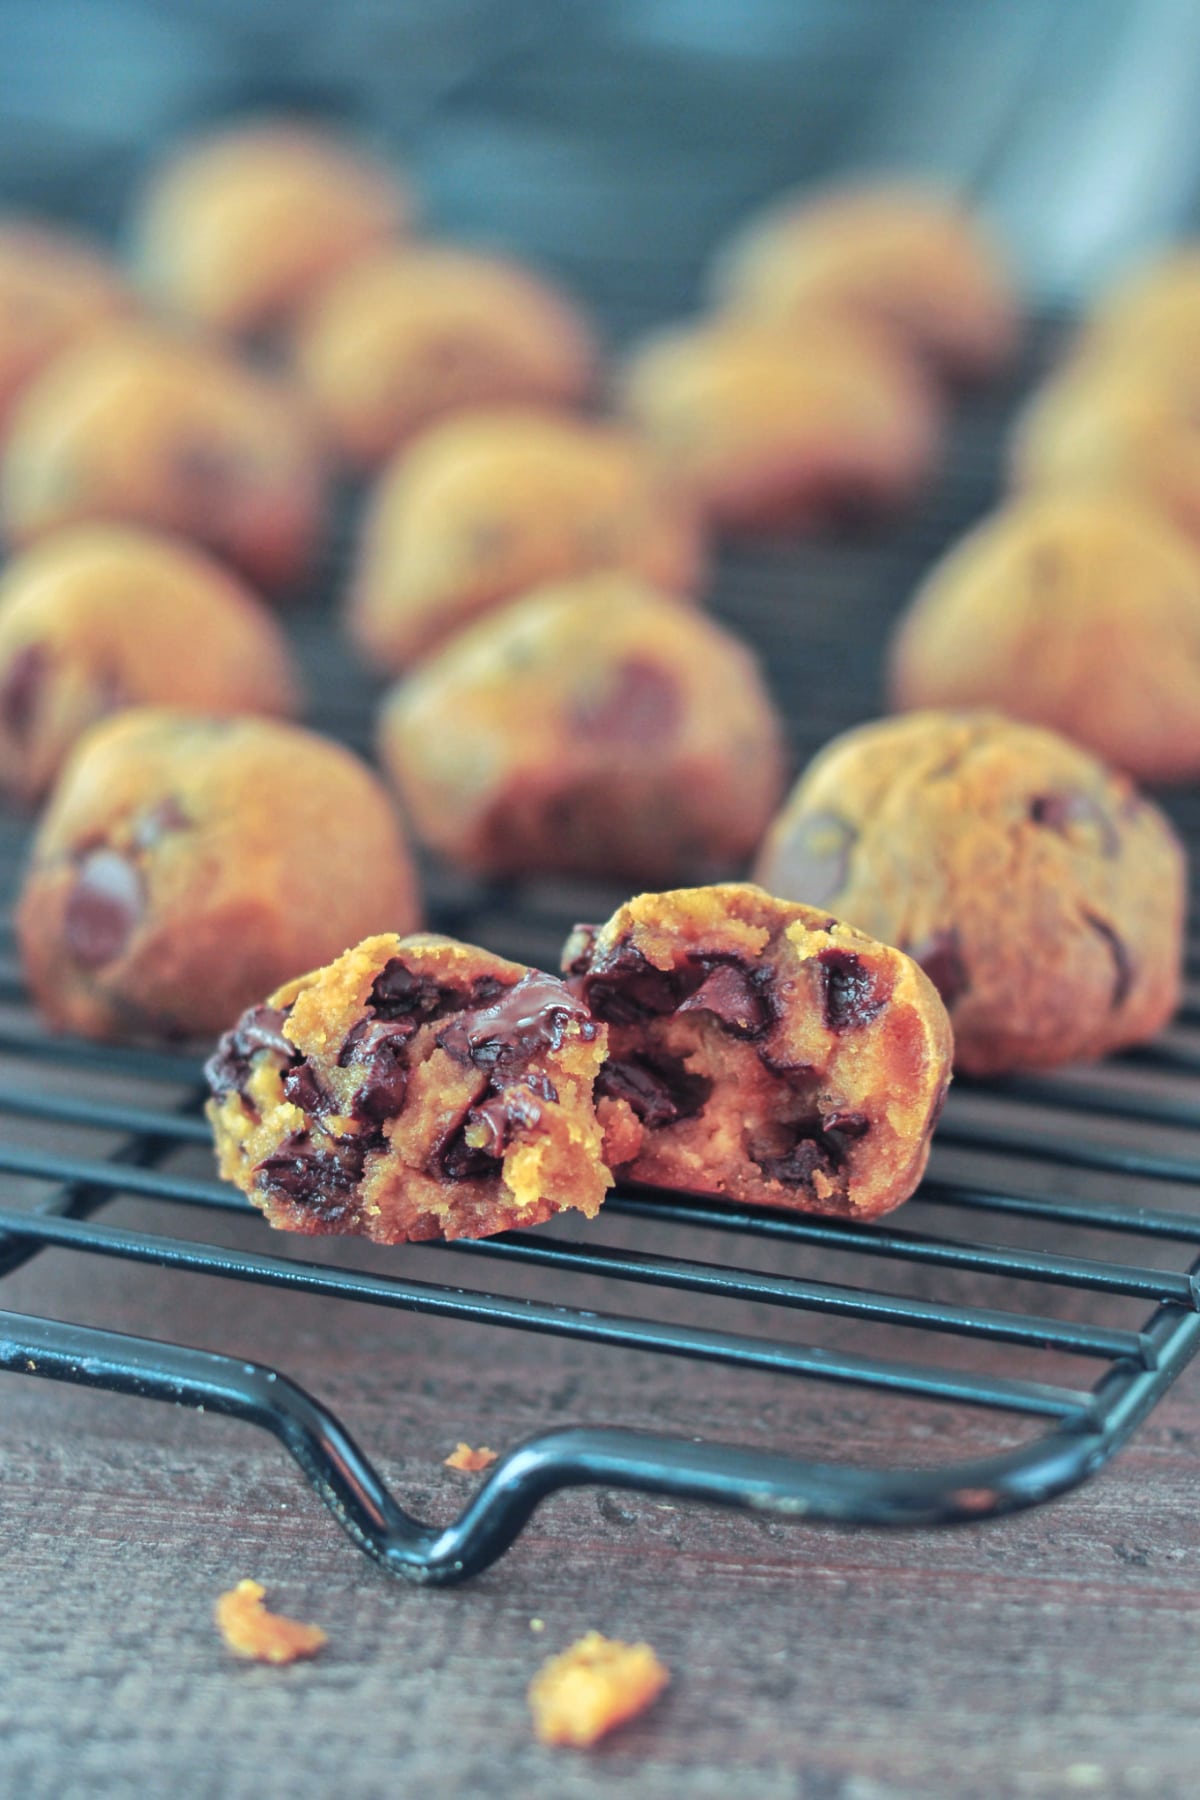 Gluten free chickpea cookies on a cooling rack. One cookie is split in half to show melty chocolate chips inside.